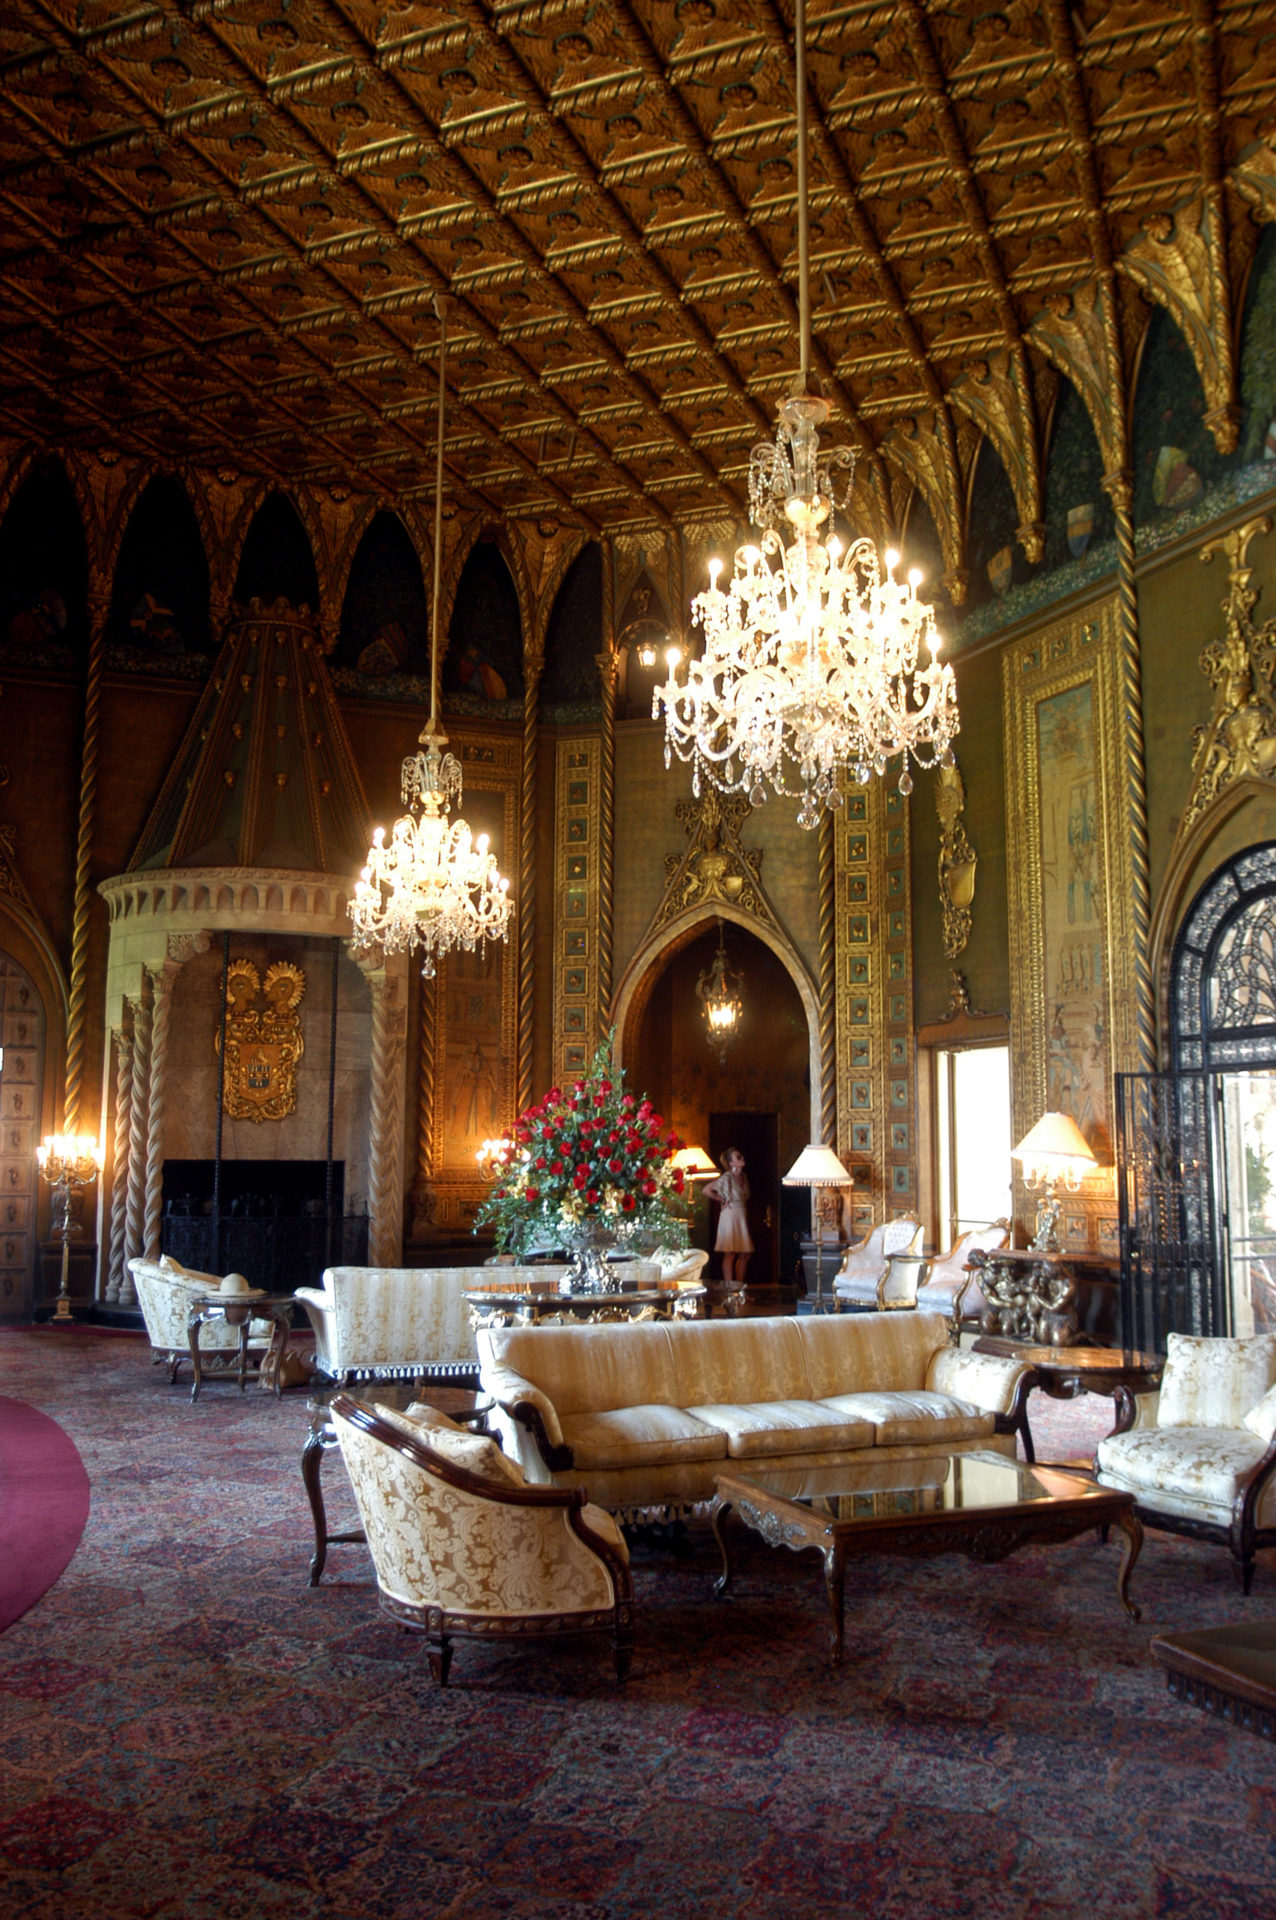 Views inside the Mar-a-Lago estate, owned by Donald Trump, in 2008